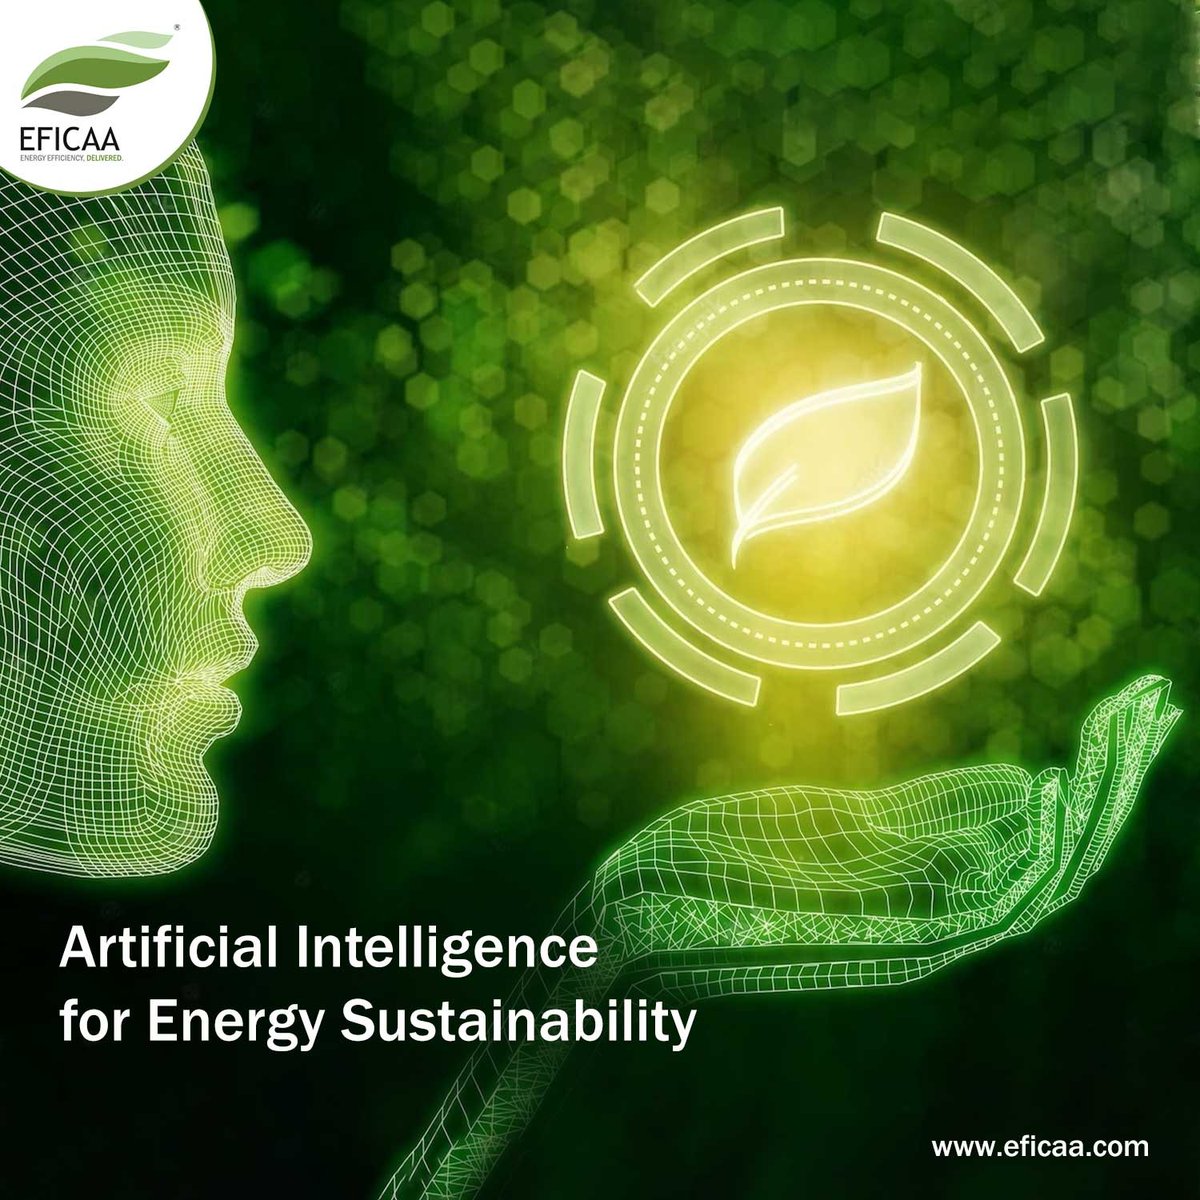 AI transforms sustainability by analyzing data, optimizing energy usage, and enabling predictive modeling.
#eficaa #hyderabad #smartsolutions #somajiguda #aiandsustainability #transformativeAI #dataanalysis #energyoptimization #predictivemodeling #sustainablefuture